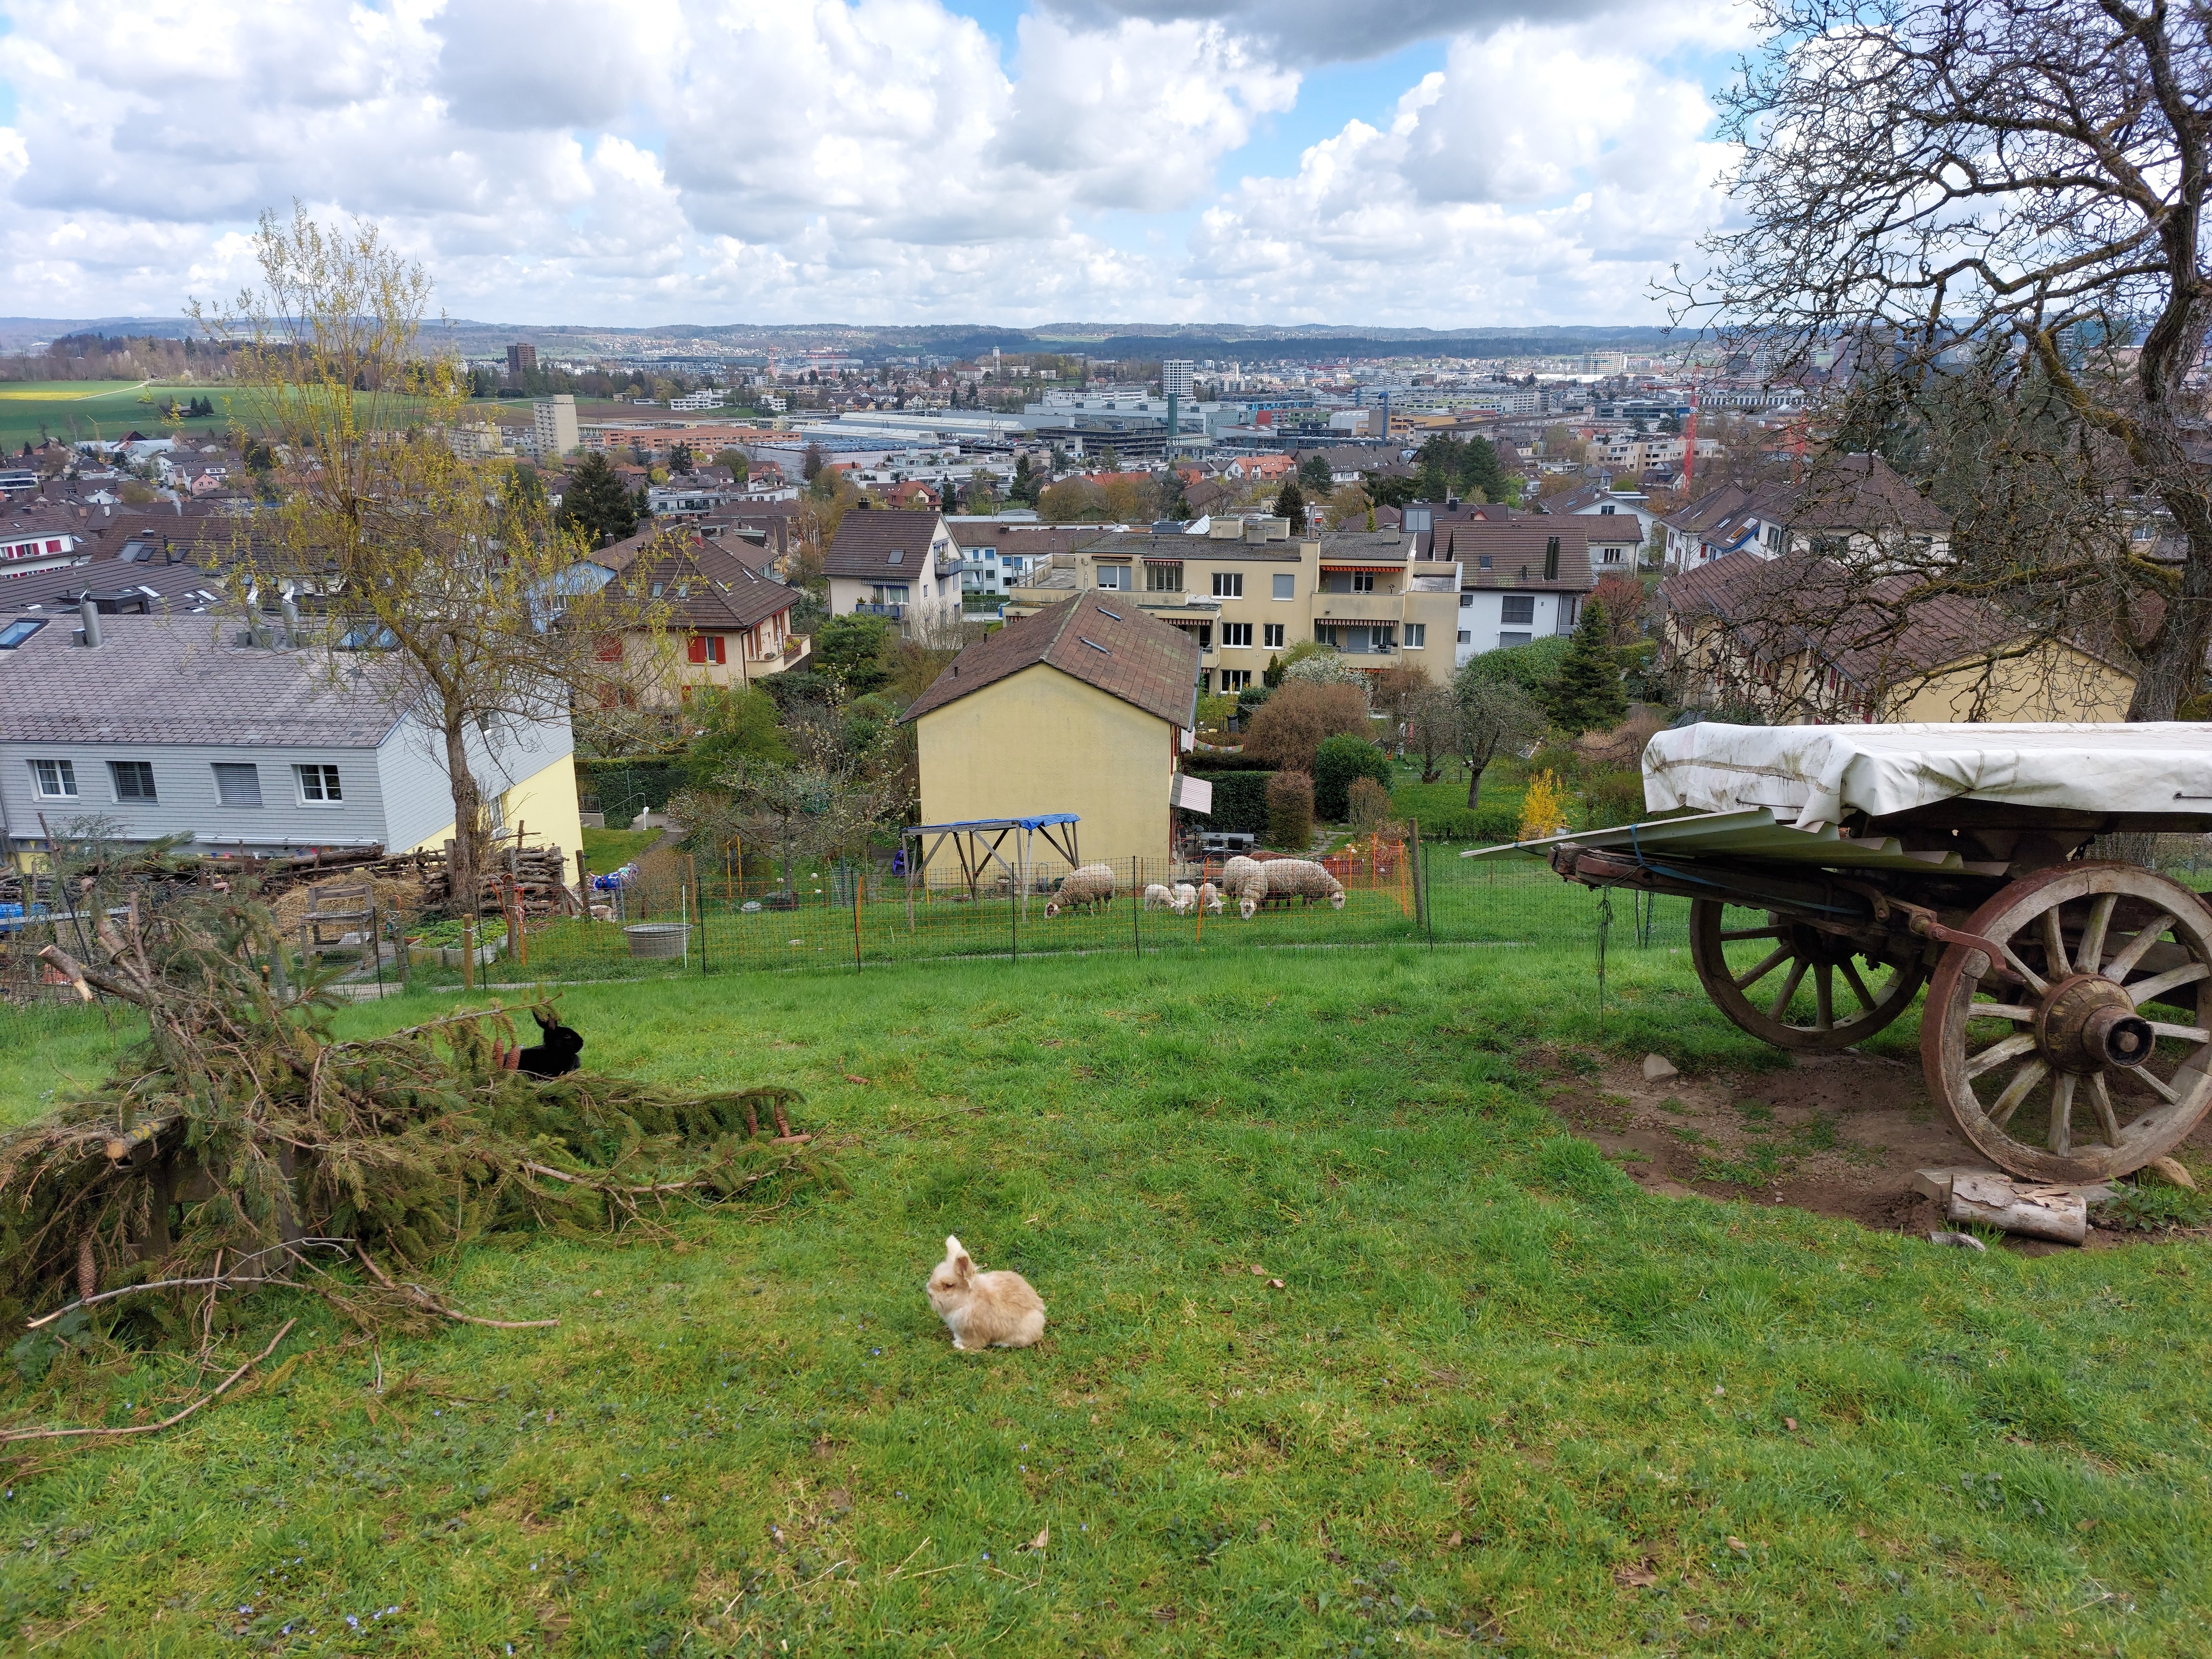 Rabbits in foreground, sheep in back, Oerlikon behind them both